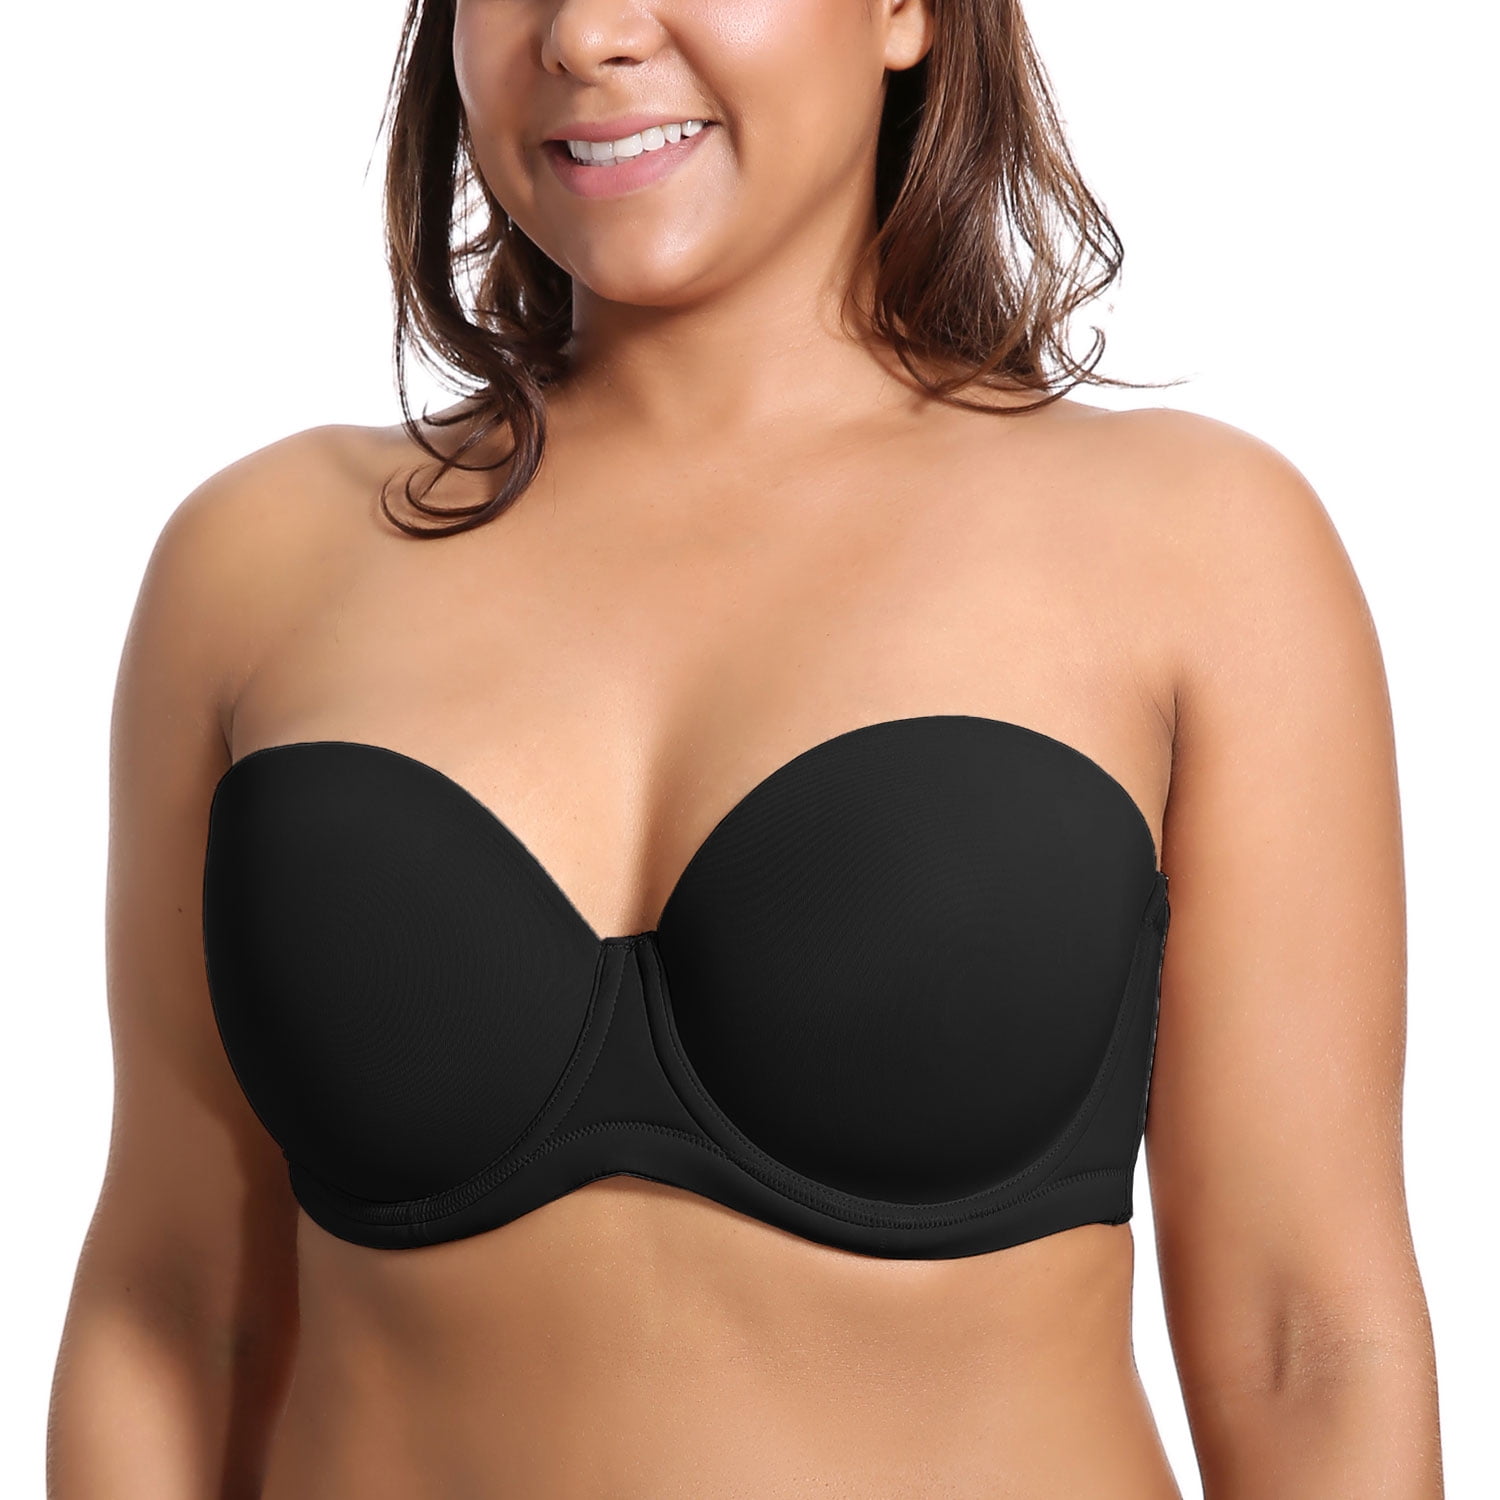 Wide Strap Bra Plus Size Full Coverage Underwire Support Panels 34 36 38 40  42 44 46 / C D E F G H I J ( 34I, Red) 